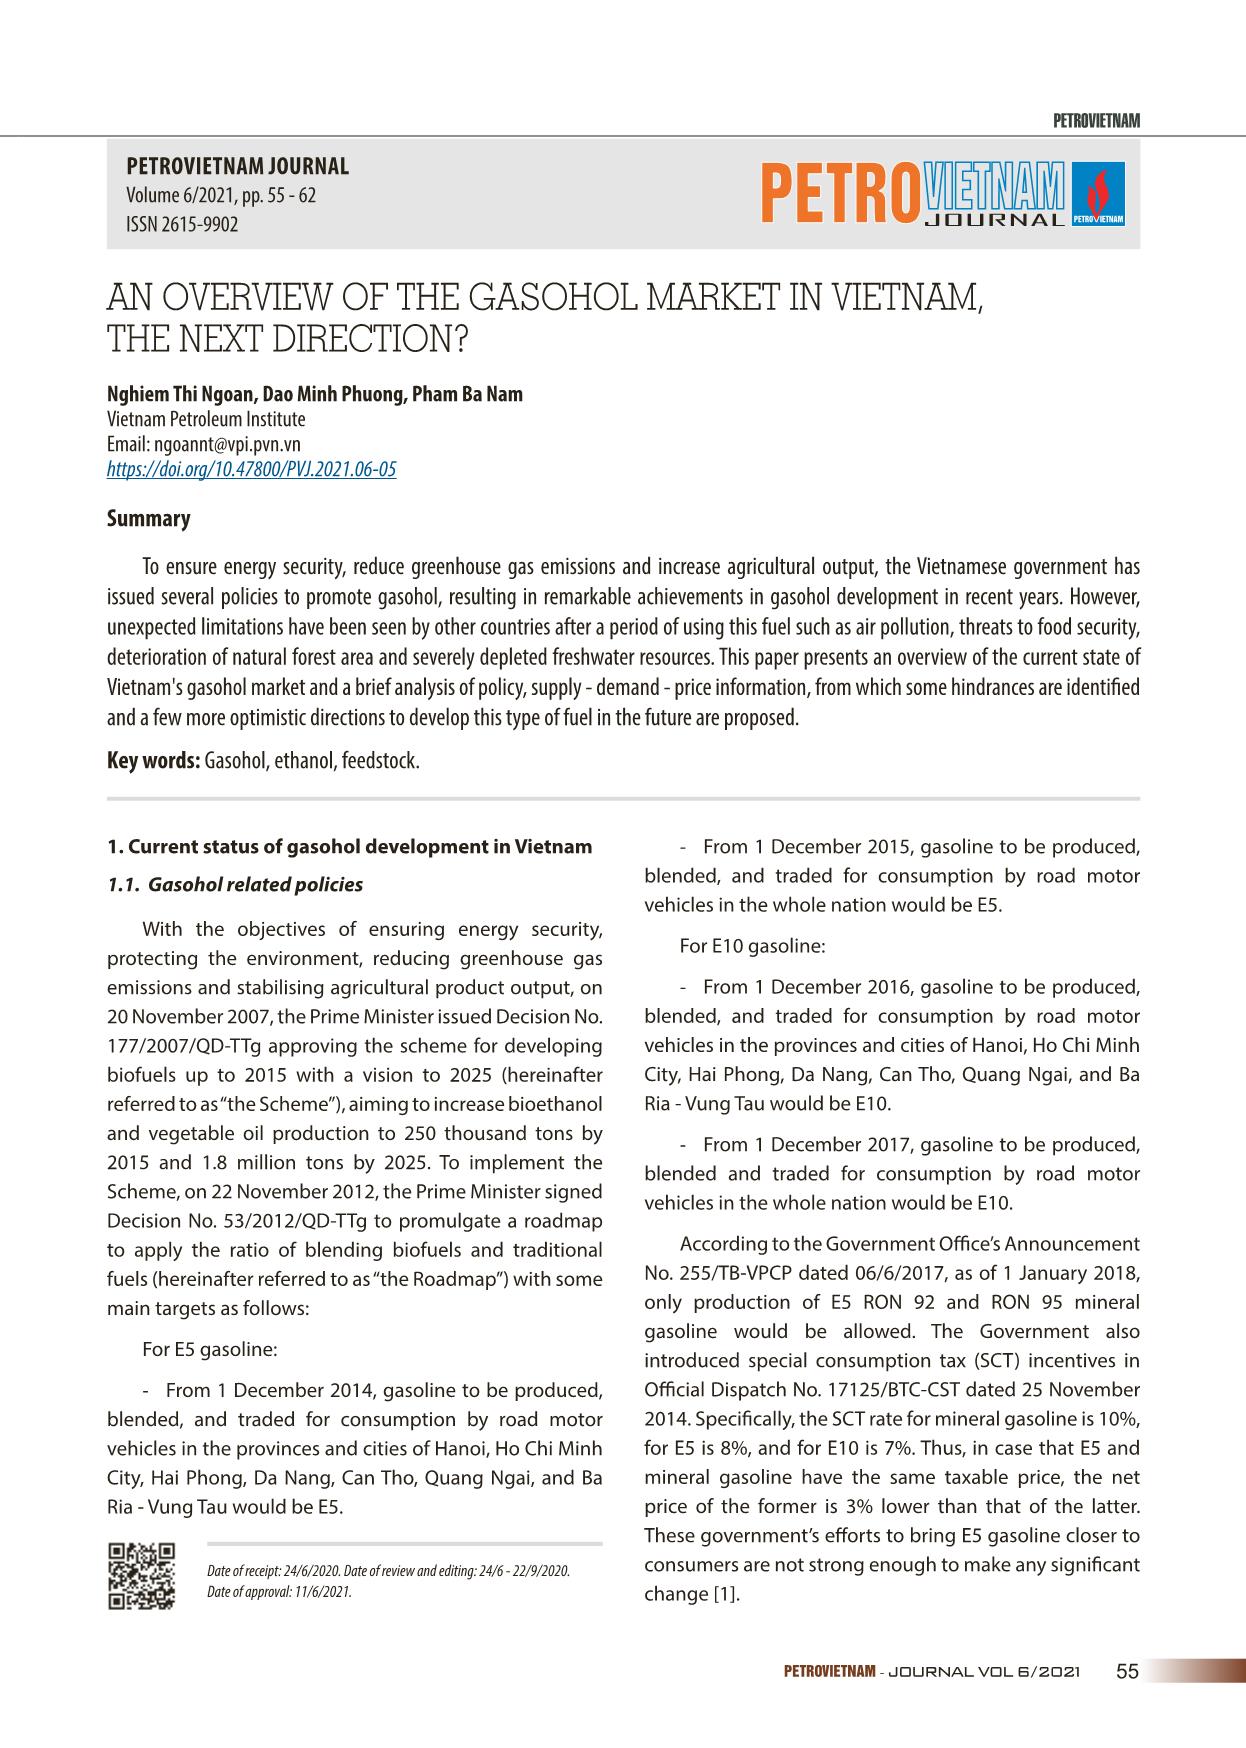 An overview of the gasohol market in Vietnam, the next direction? trang 1